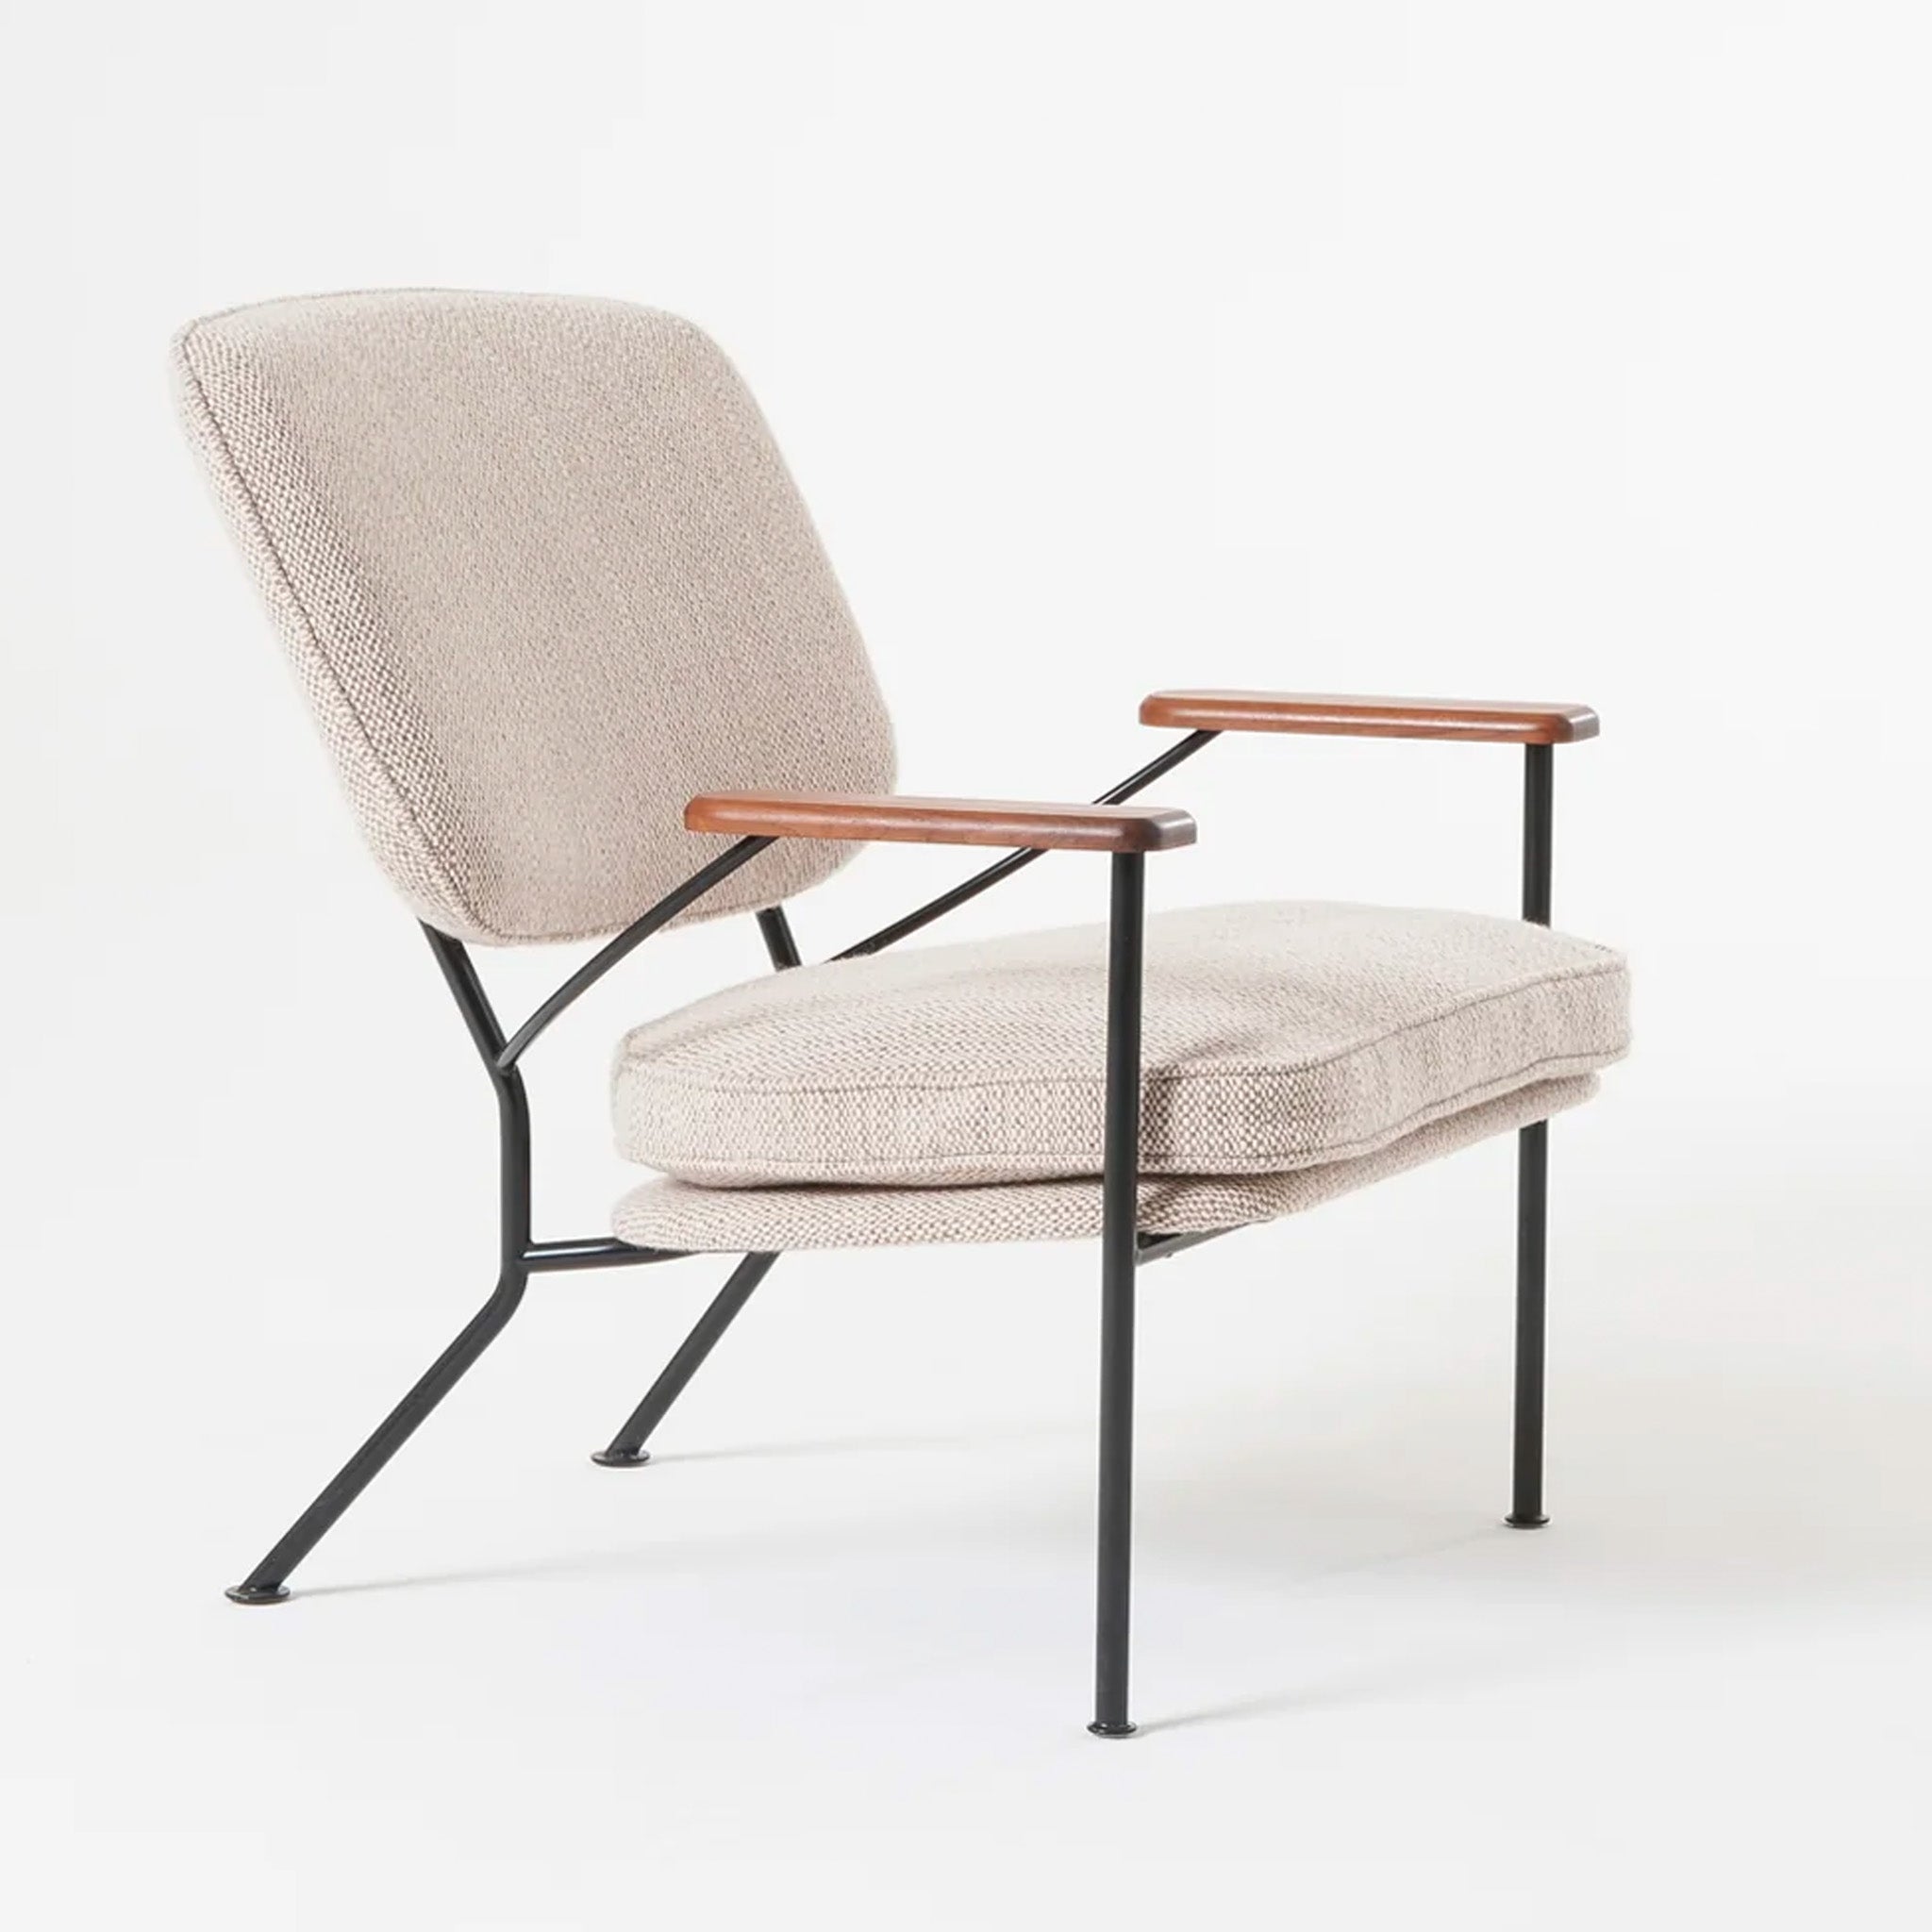 Orlando Lounge Chair by SCP